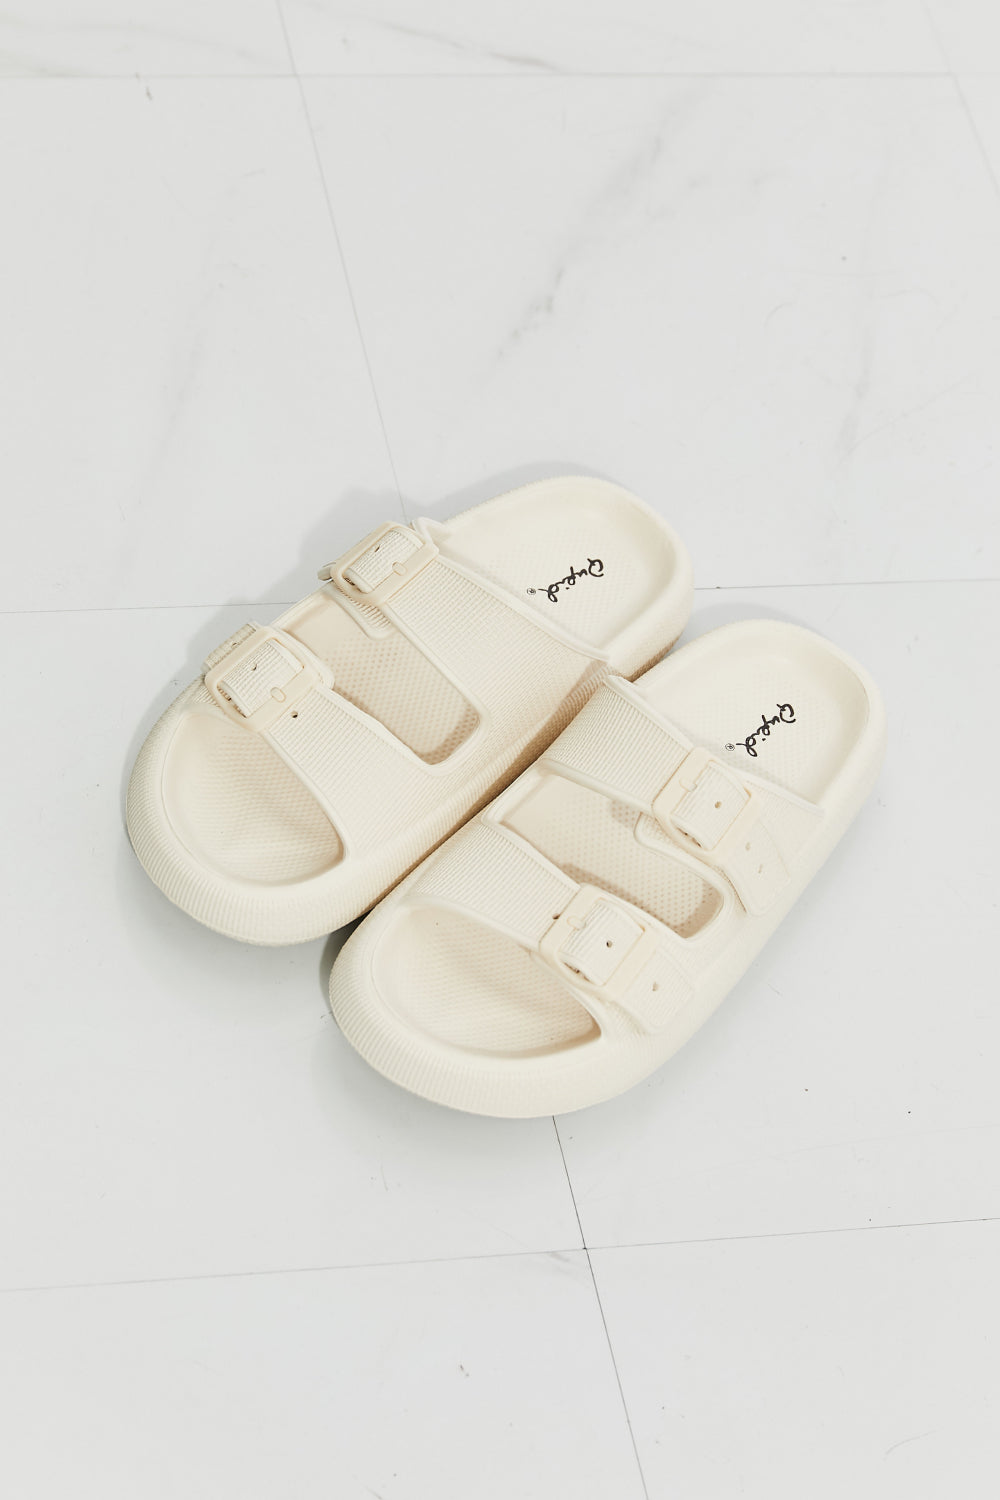 Qupid Comfy Casual Rubber Slide Sandal in Cream